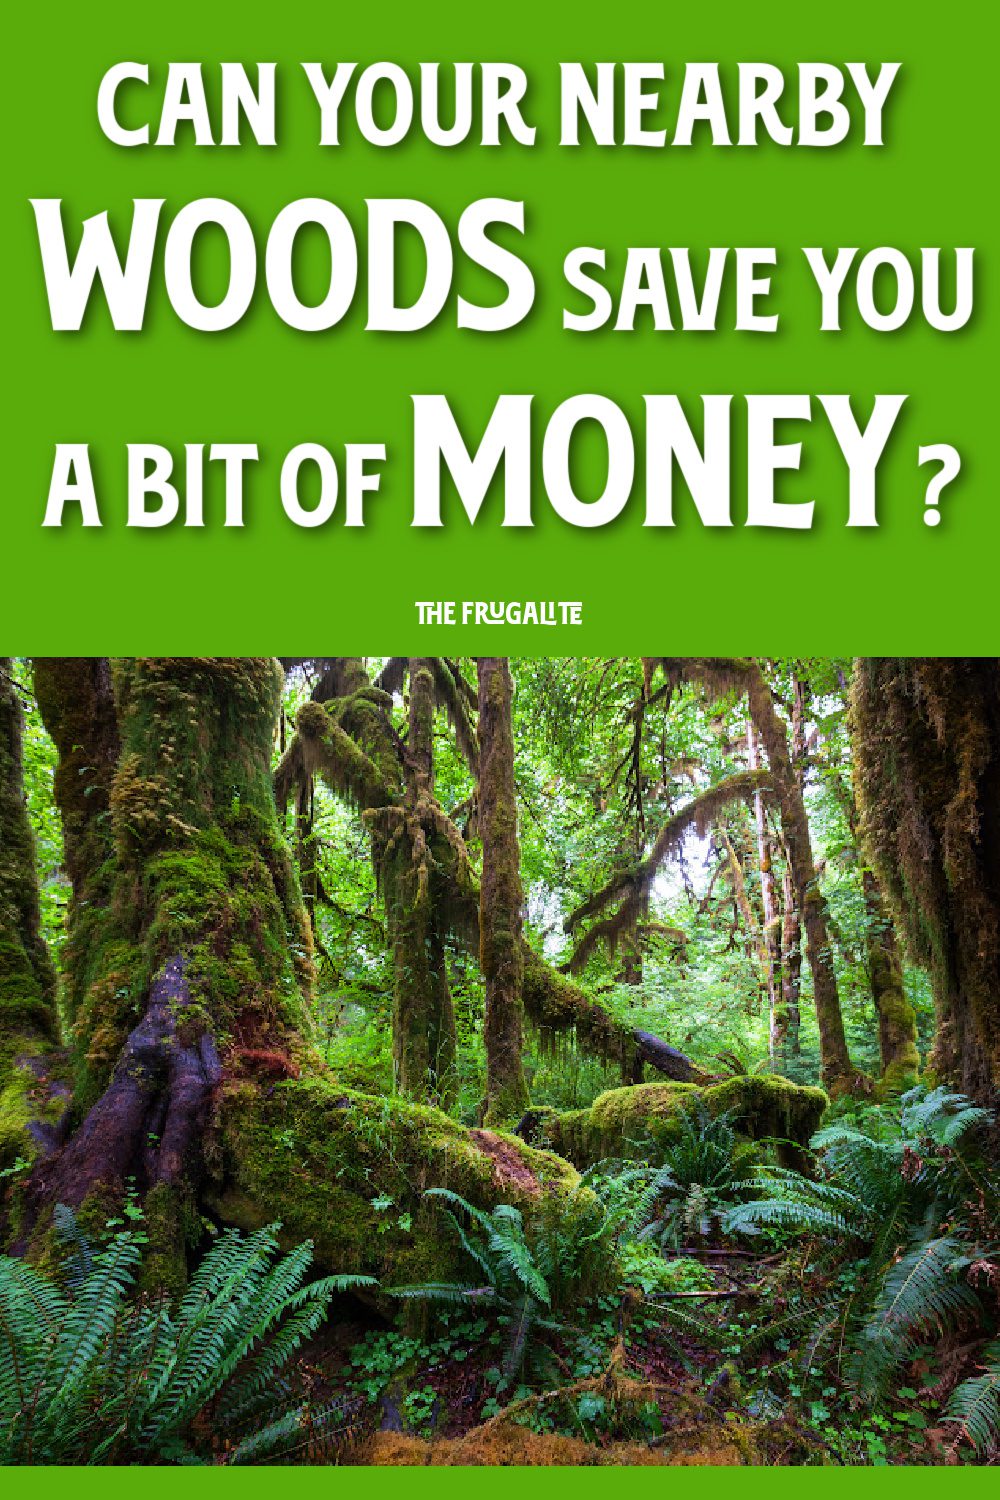 Can Your Nearby Woods Save You a Bit of Money?